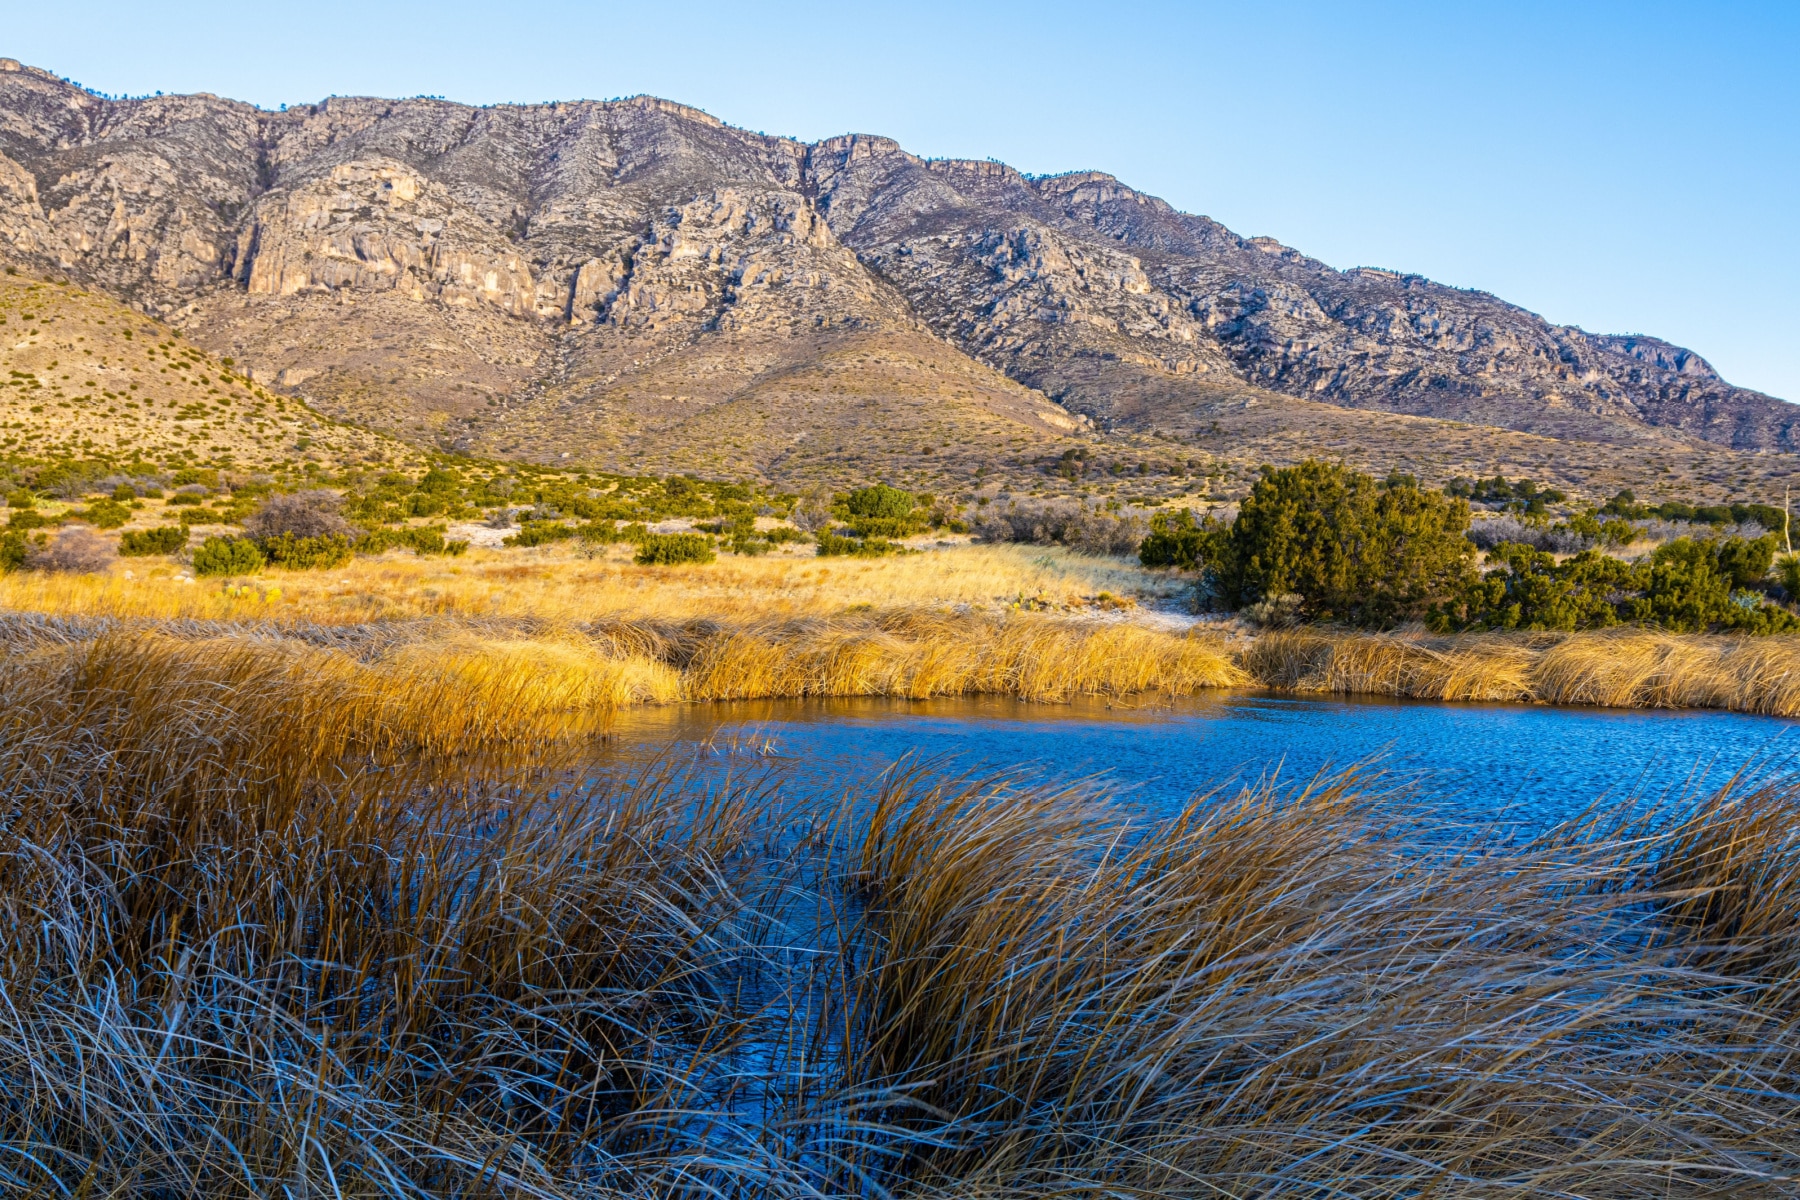 A lake sits in front of the Guadalupe Mountain Range, towering above.